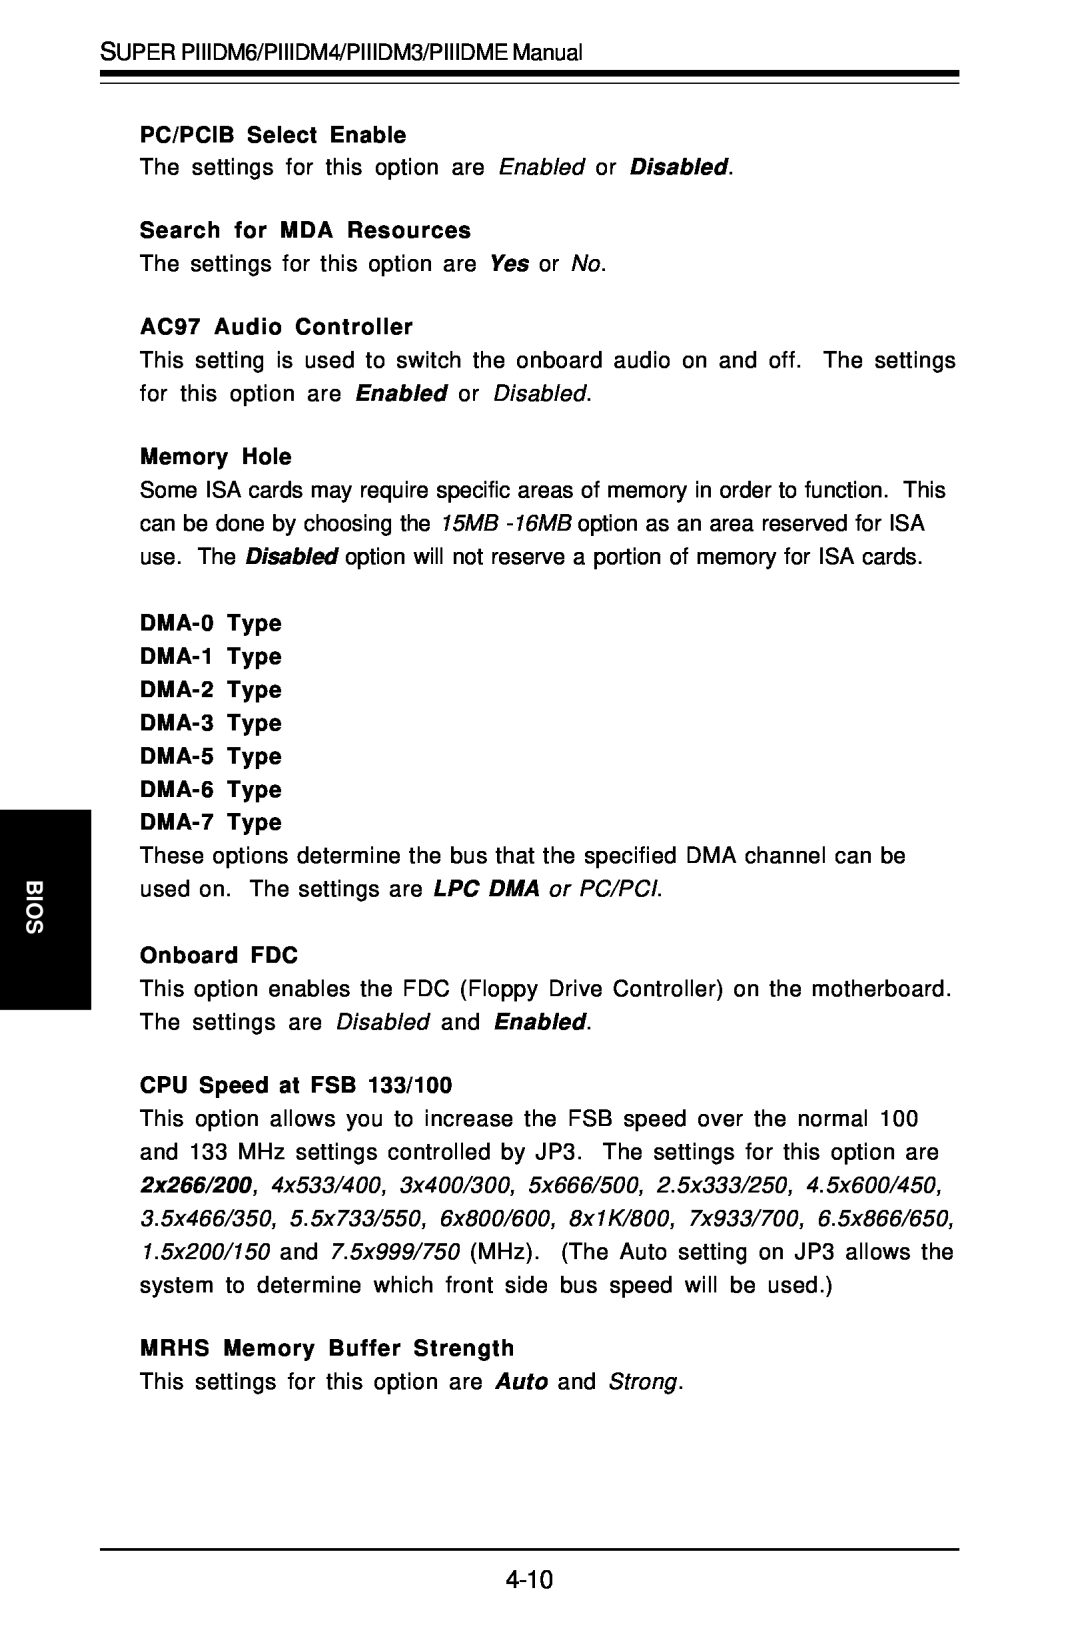 SUPER MICRO Computer Super PIIIDM6 user manual Bios, PC/PCIB Select Enable, Search for MDA Resources, AC97 Audio Controller 